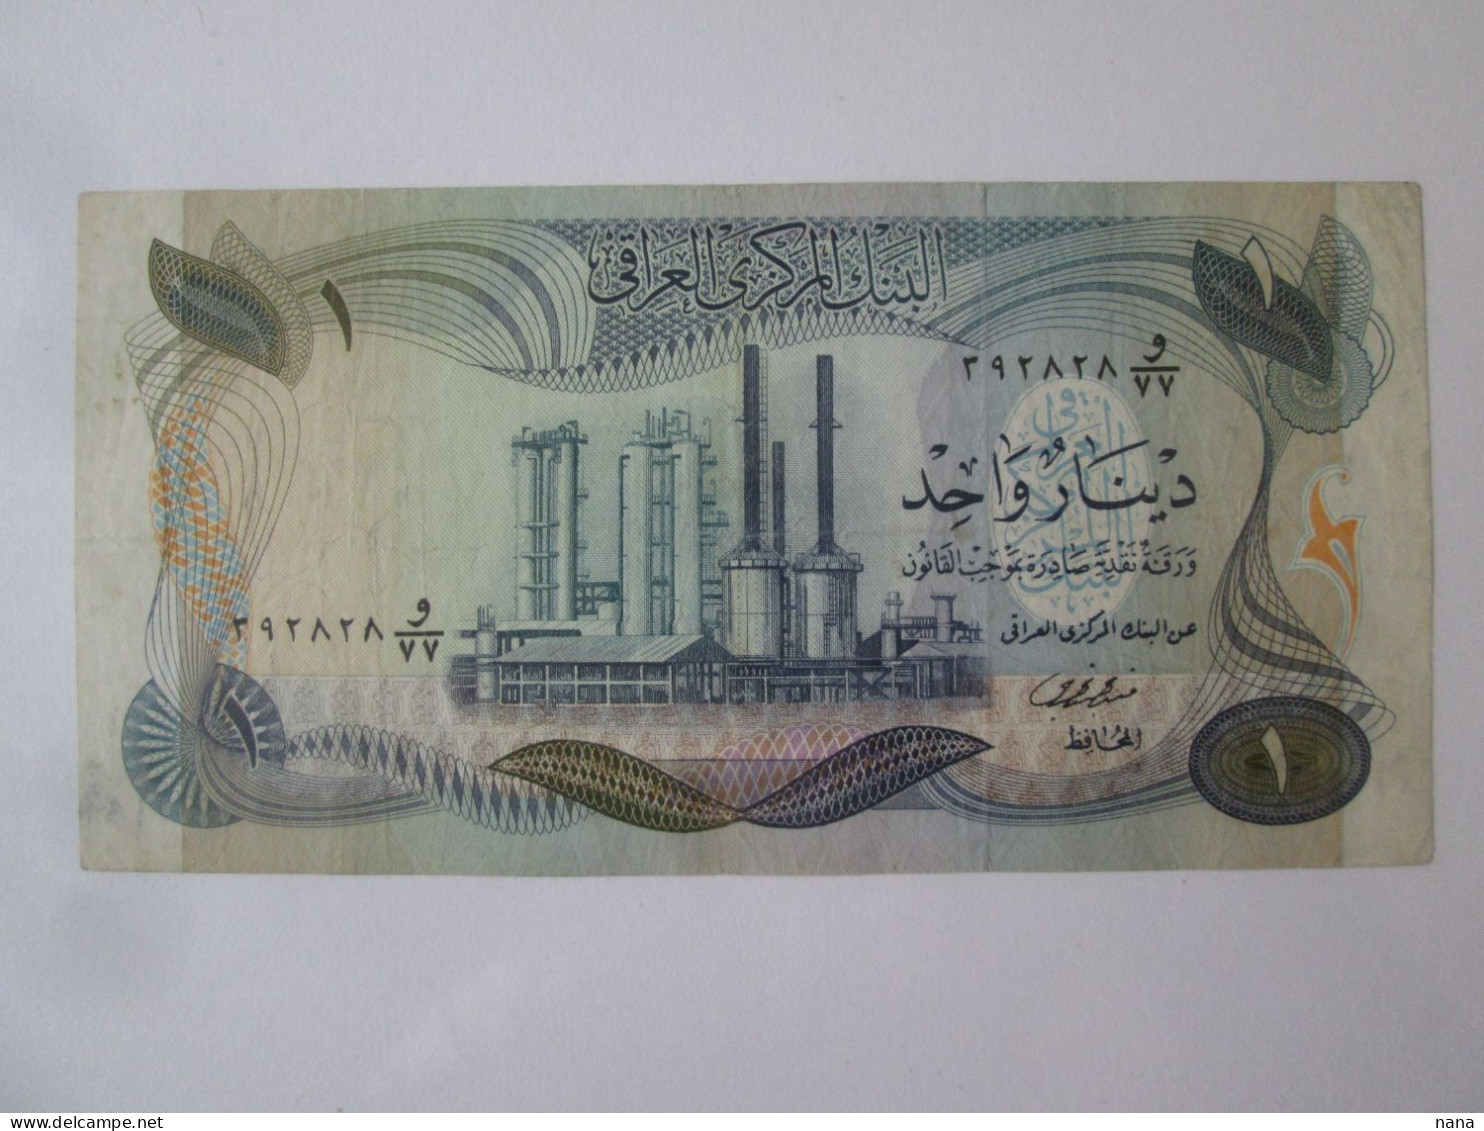 Iraq 1 Dinar 1973 Banknote See Pictures - Iraq